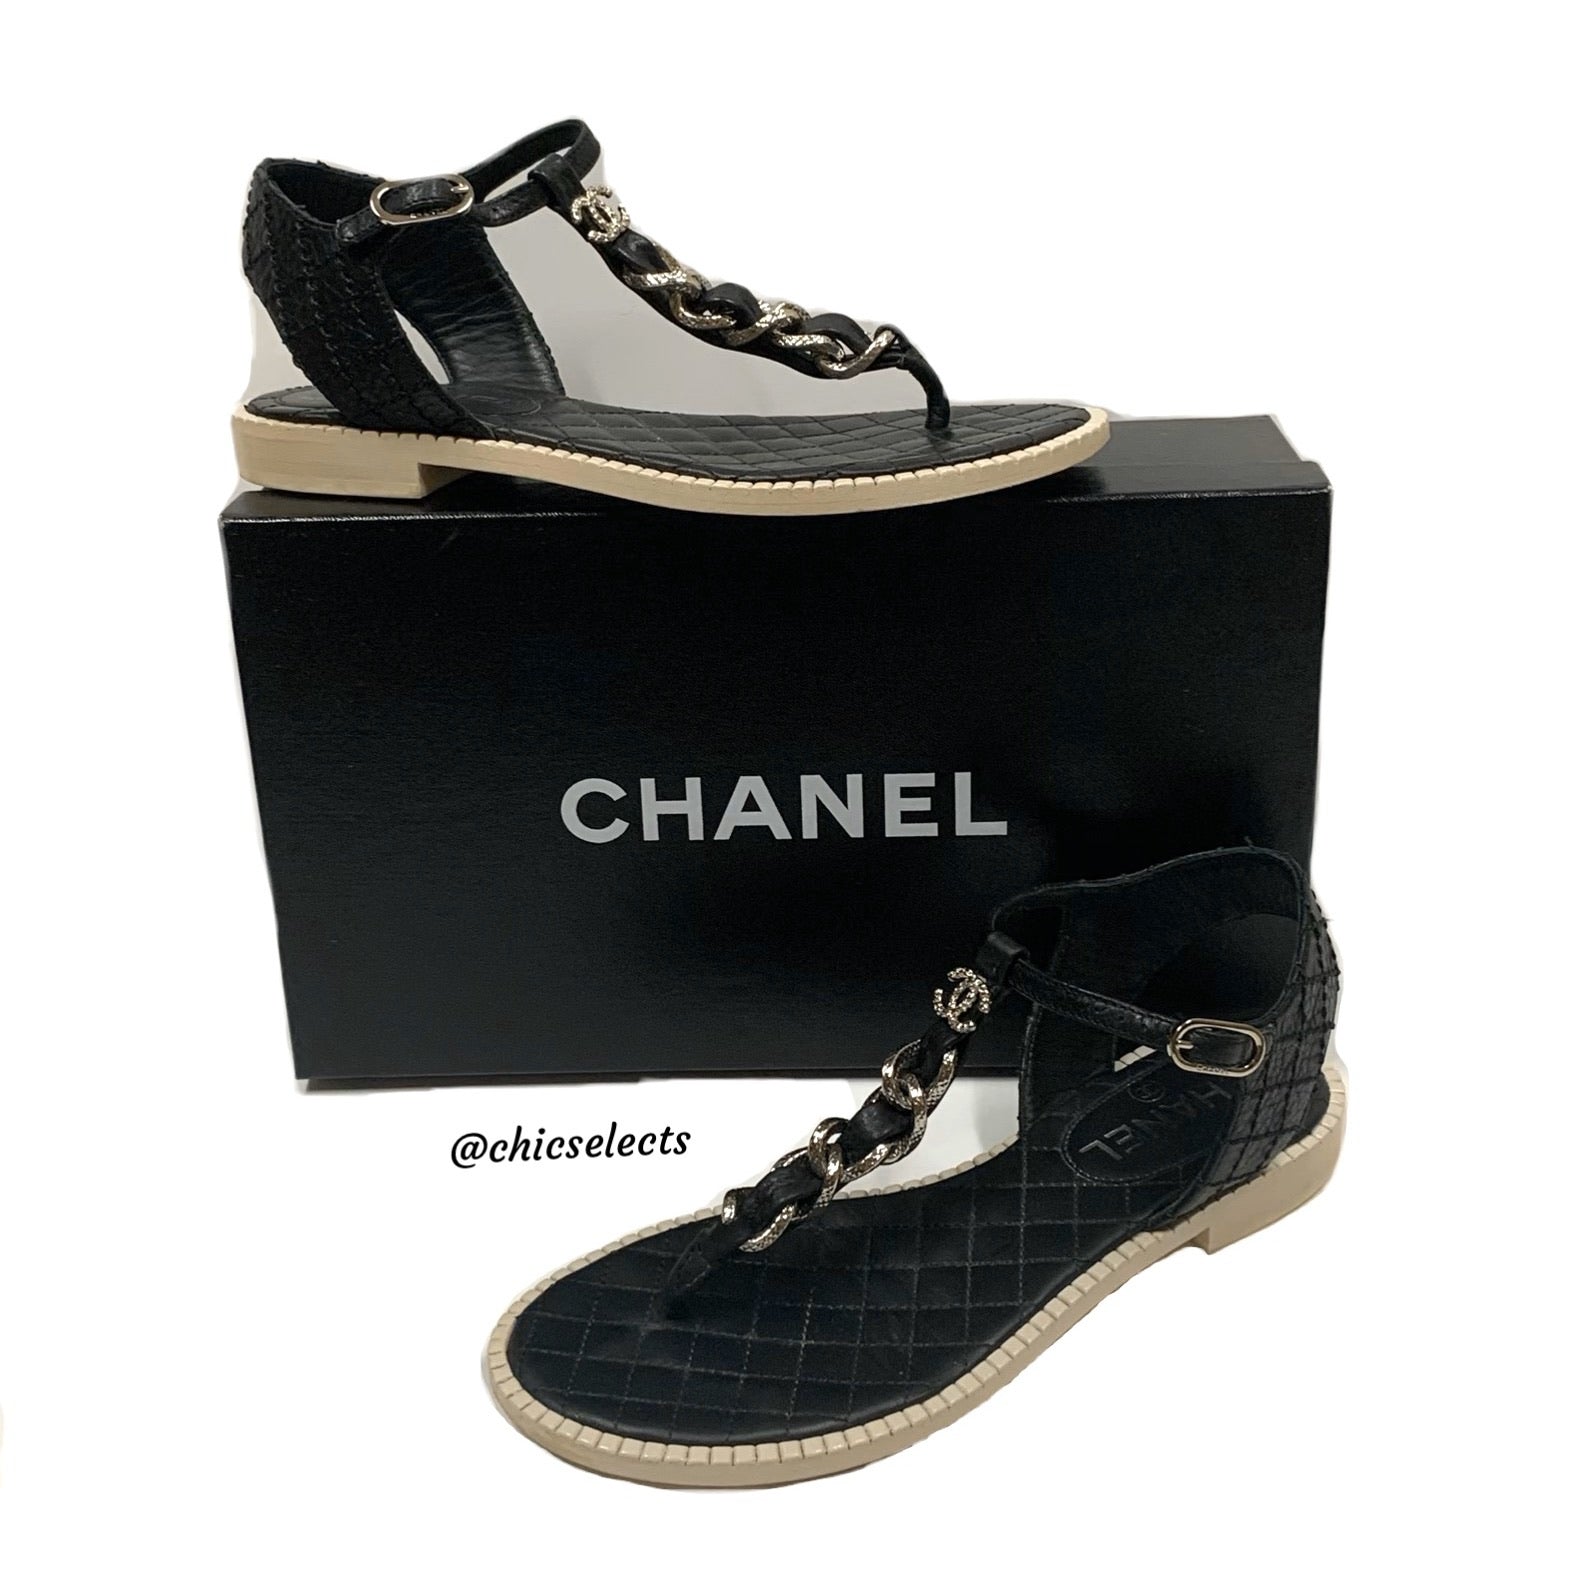 Chanel Black Leather Chain Link CC Wedge Ankle Strap Sandals Size 38